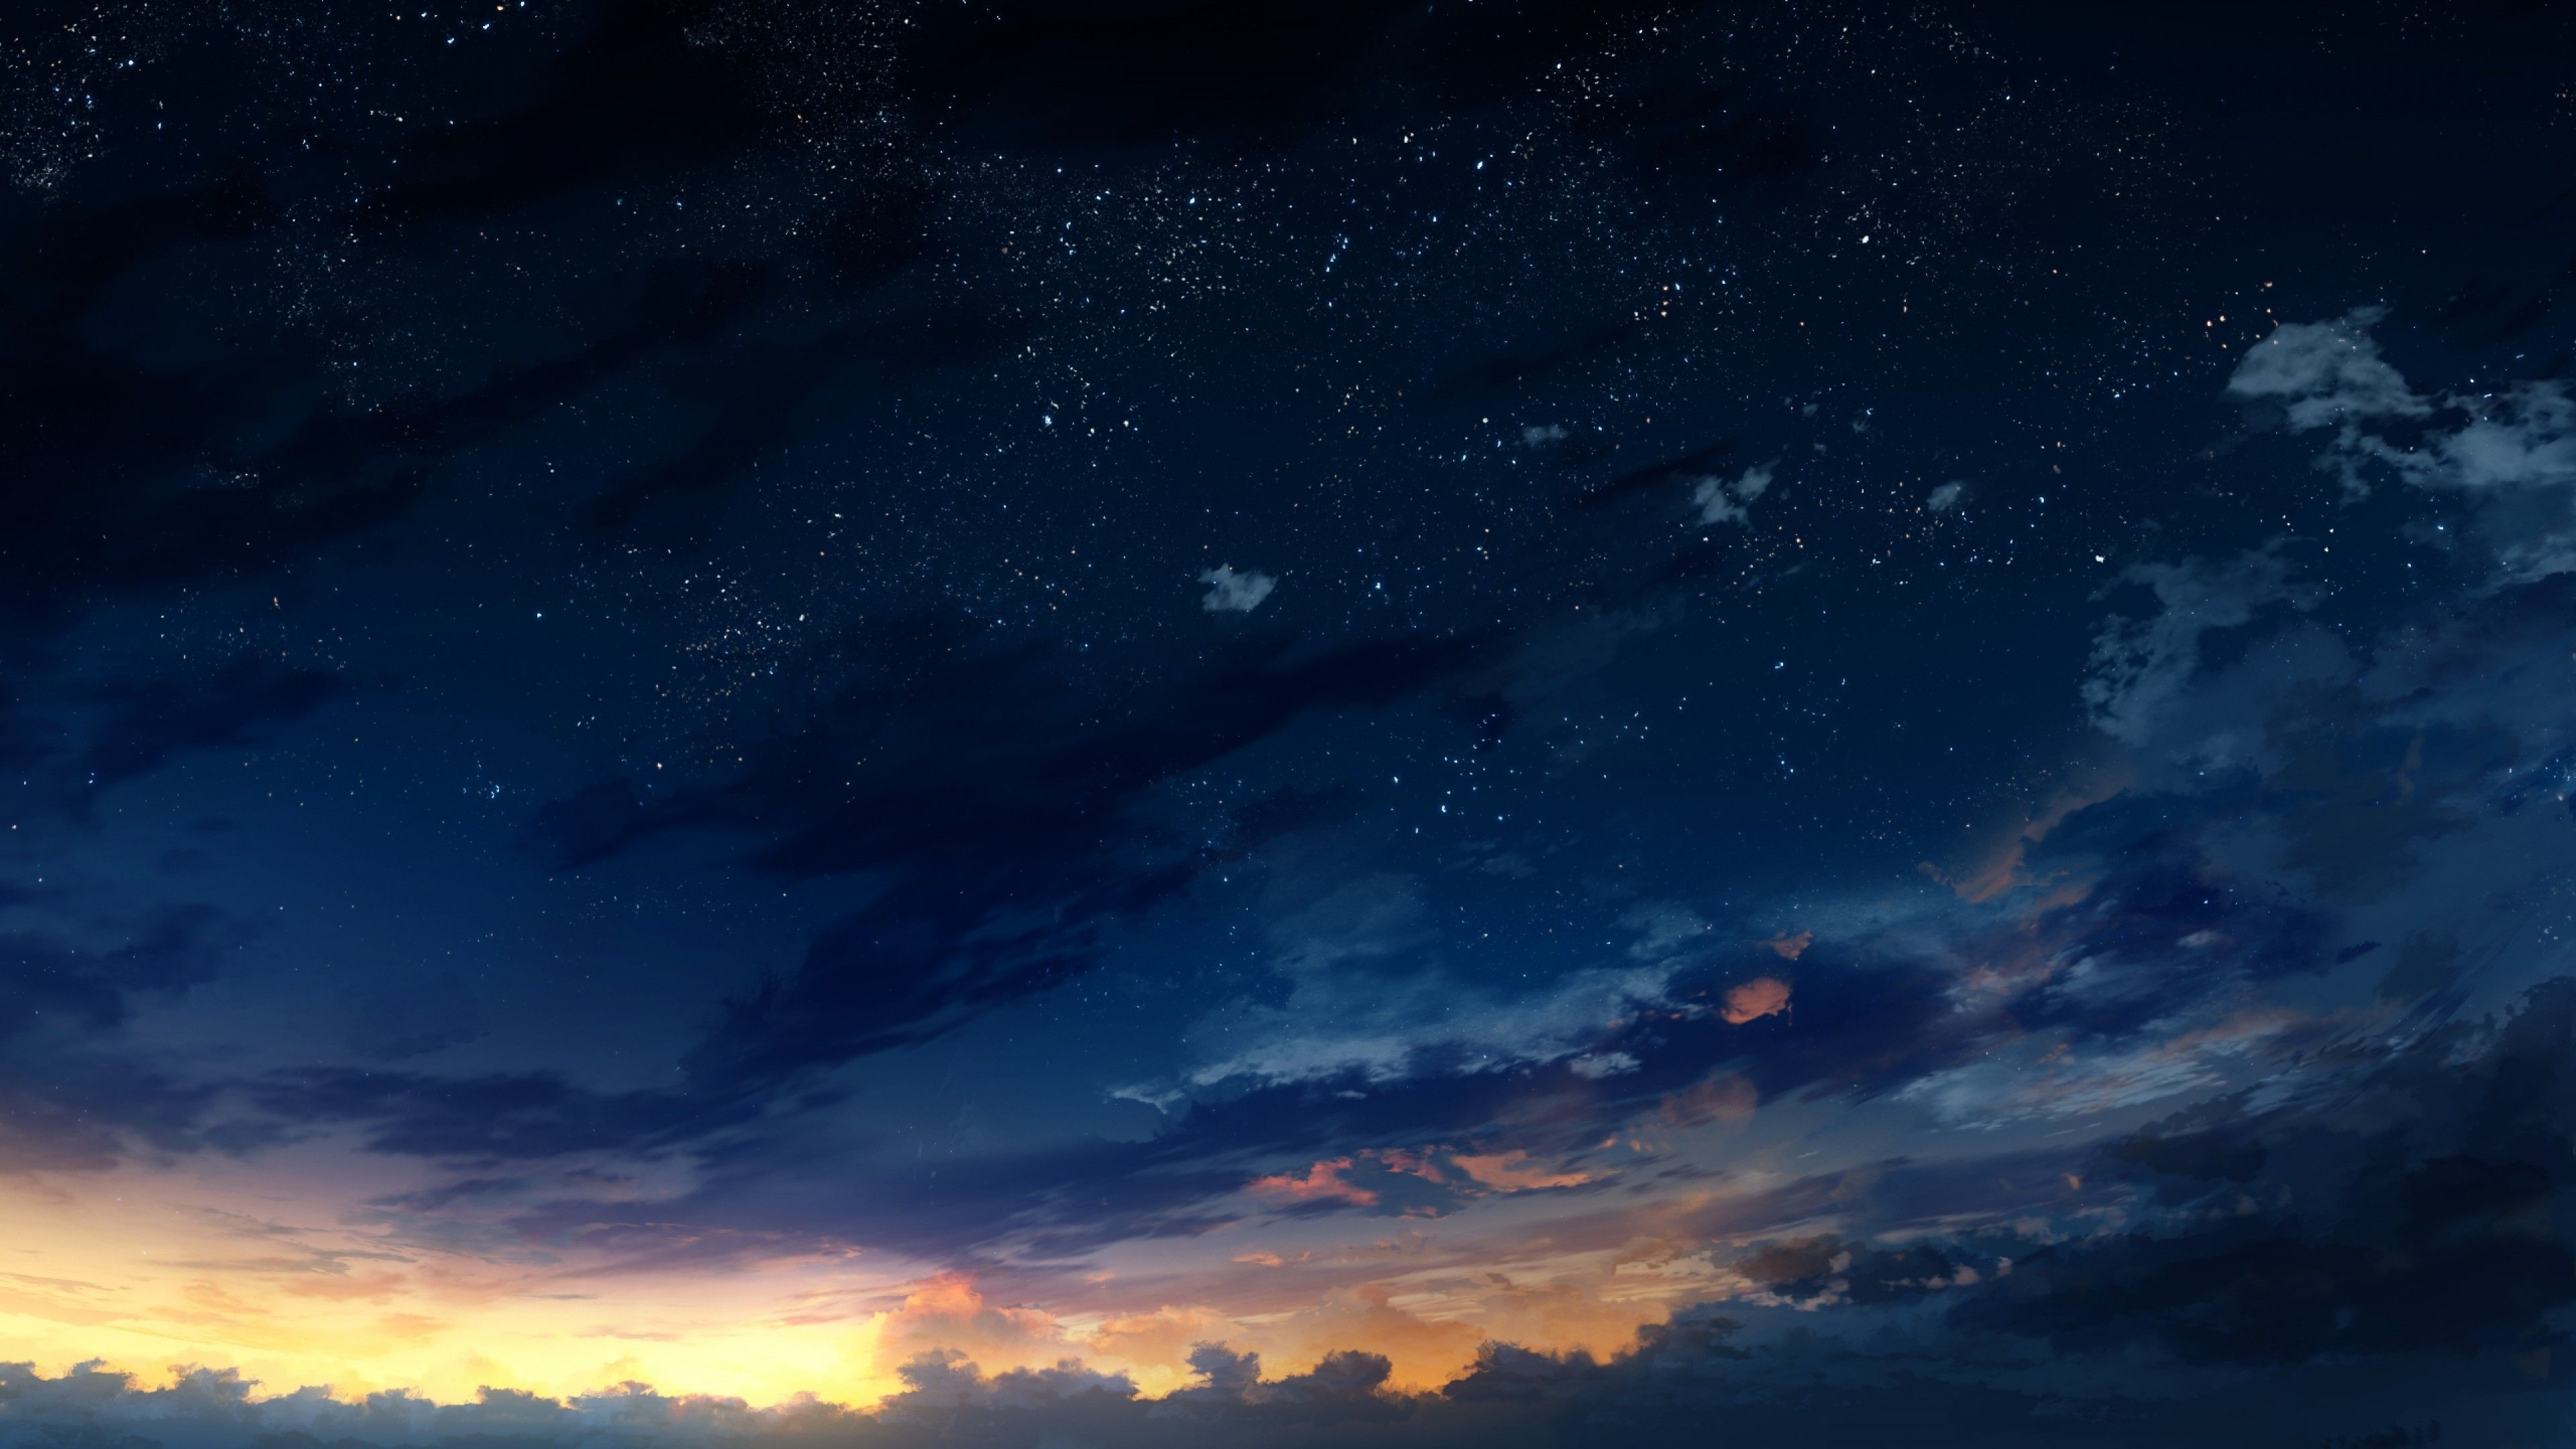 Download 3840x2160 Anime Landscape, Sunset, Clouds, Sky, Night Wallpaper for UHD TV